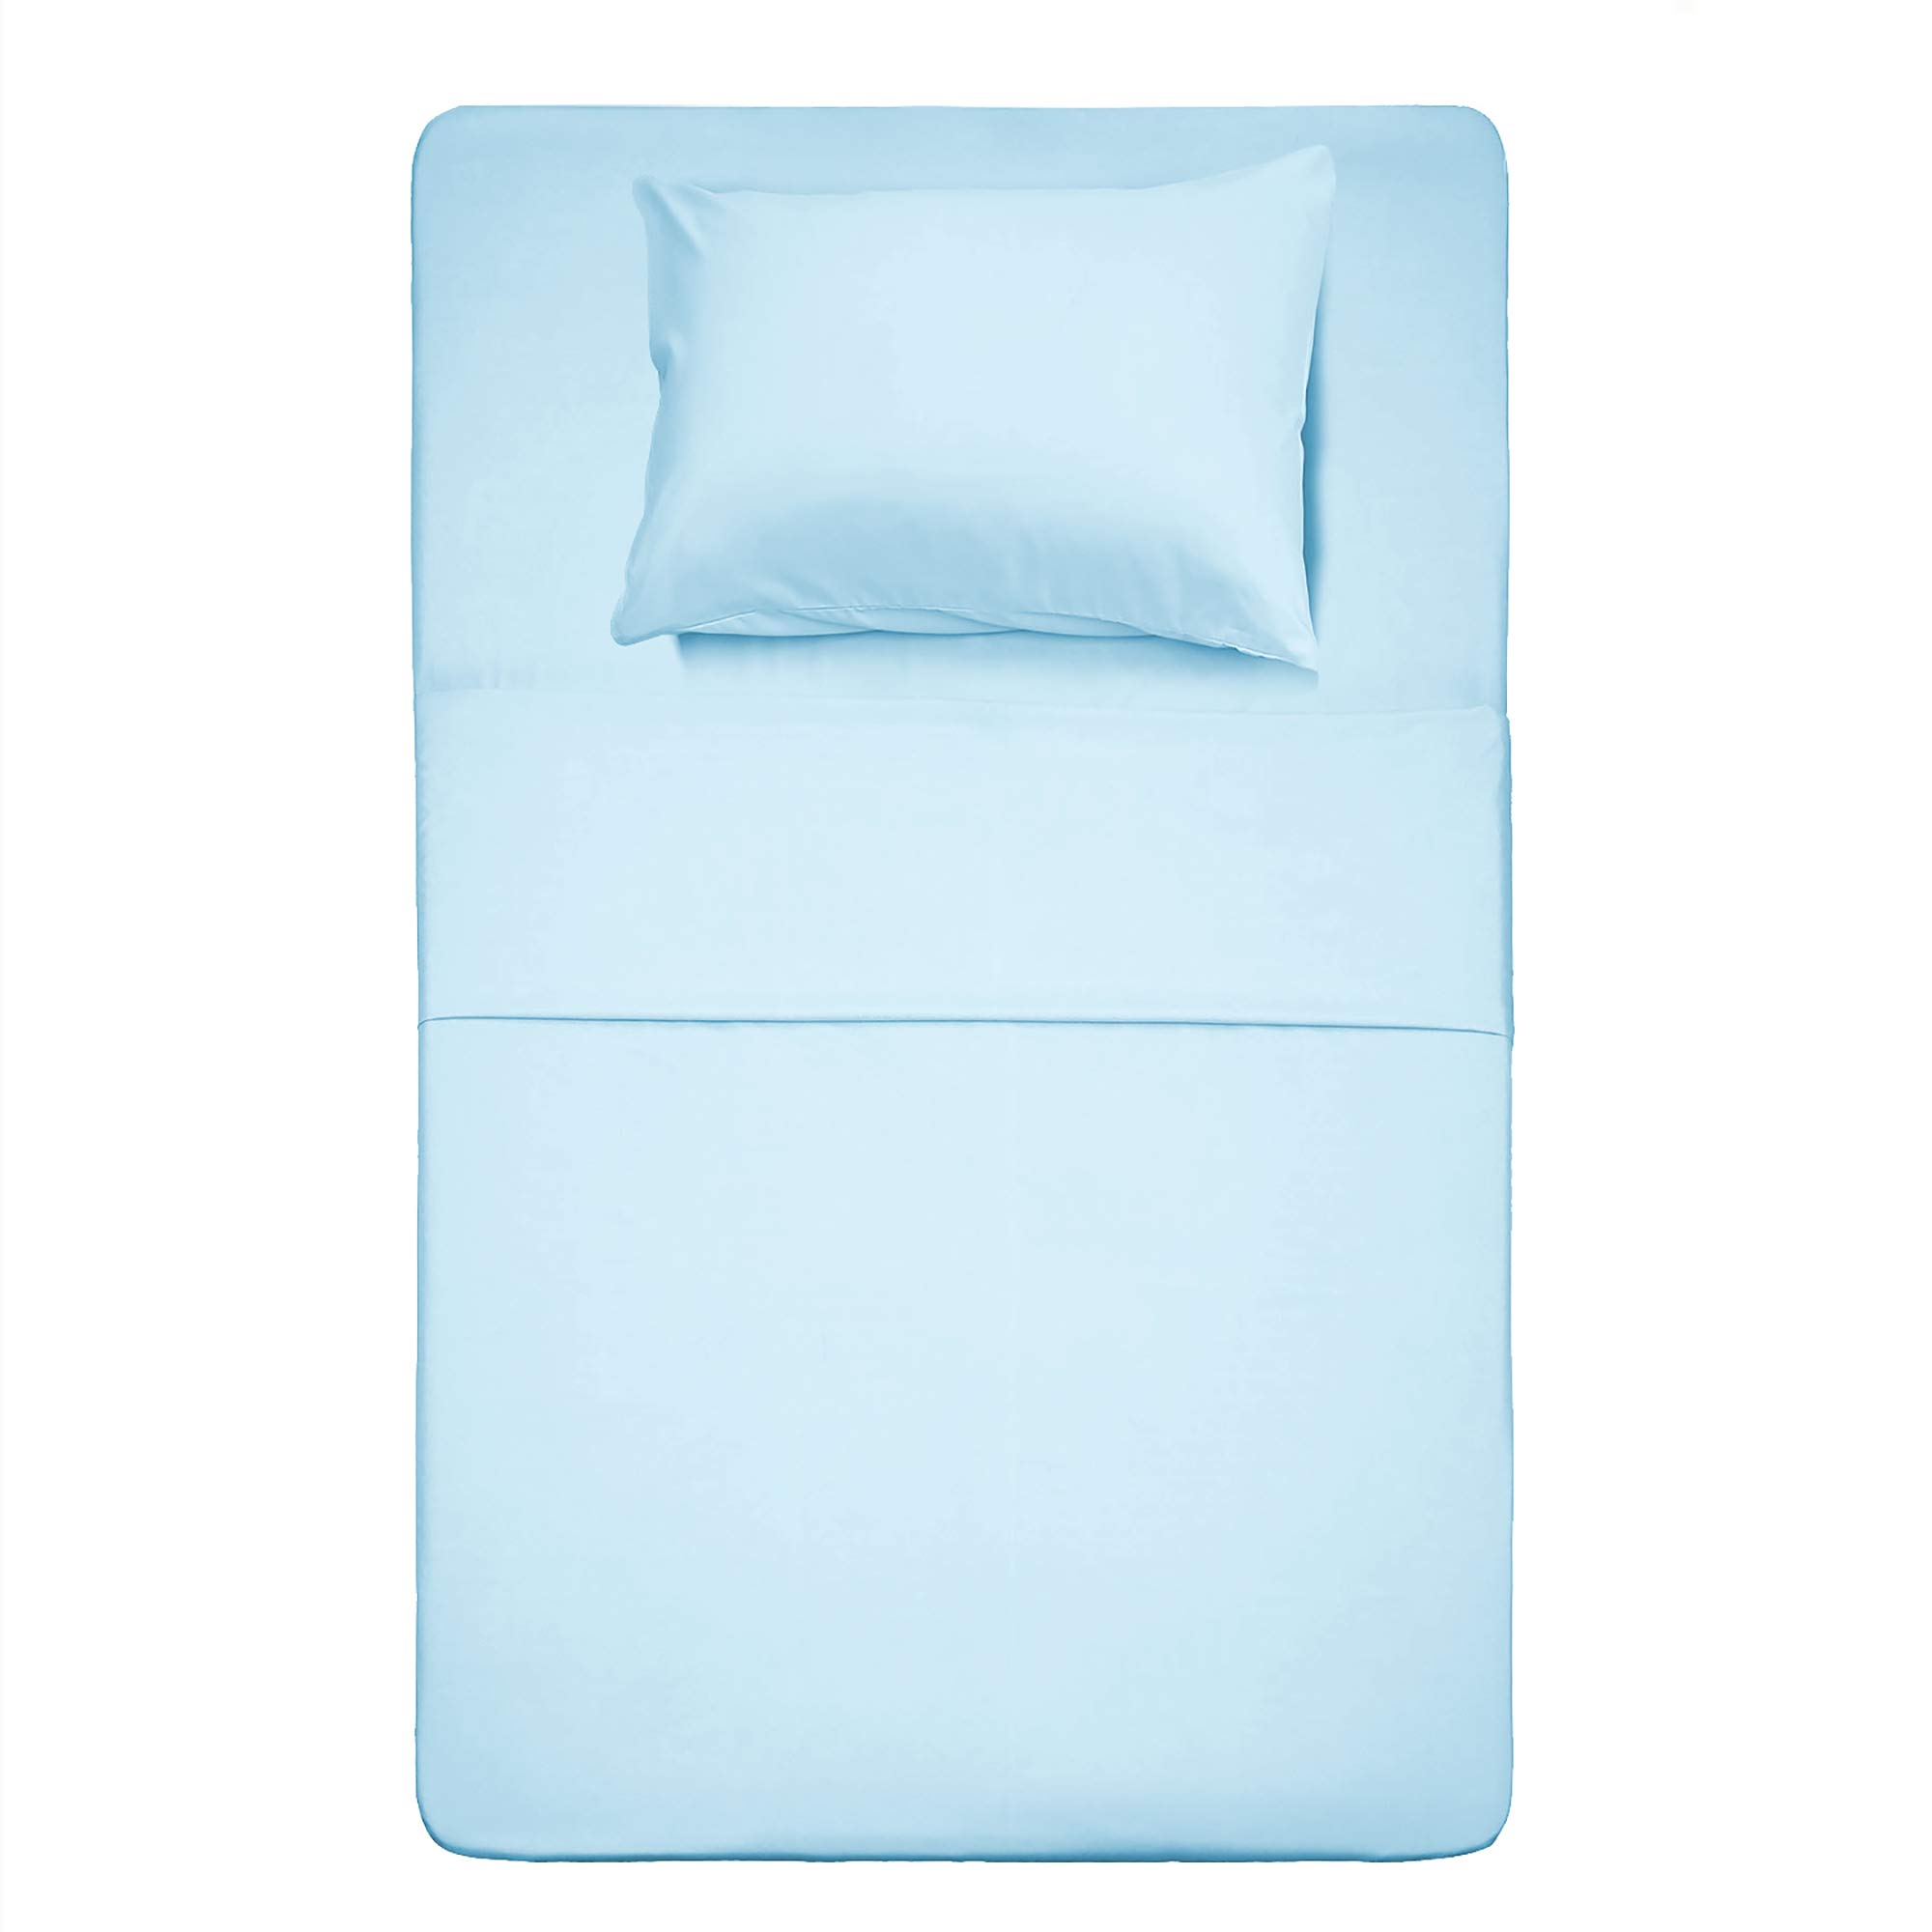 Book Cover Best Season Bed Sheet Set - 1 Flat Sheet,1 Fitted Sheet and 1 Pillow Cases, Extra Soft Luxury Bedding Set,Deep Pockets,Wrinkle,Fade Resistant - Hypoallergenic- 3 Piece (Twin,Baby Blue)